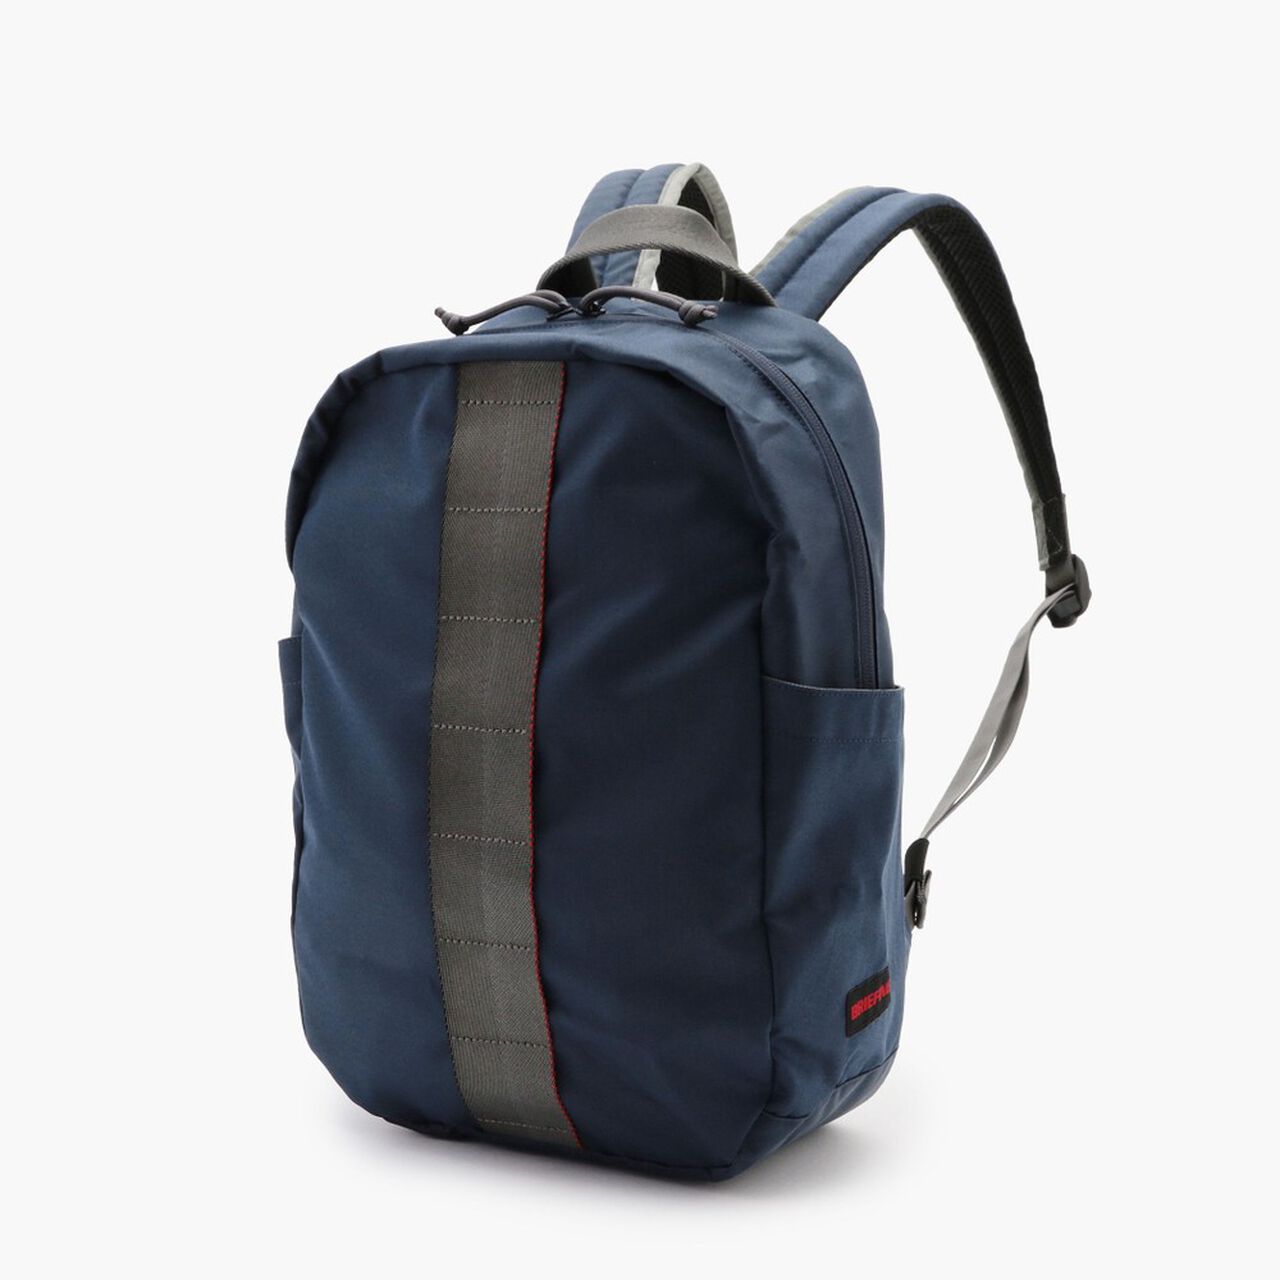 URBAN GYM LIGHT PACK S,Navy×Gray, large image number 0